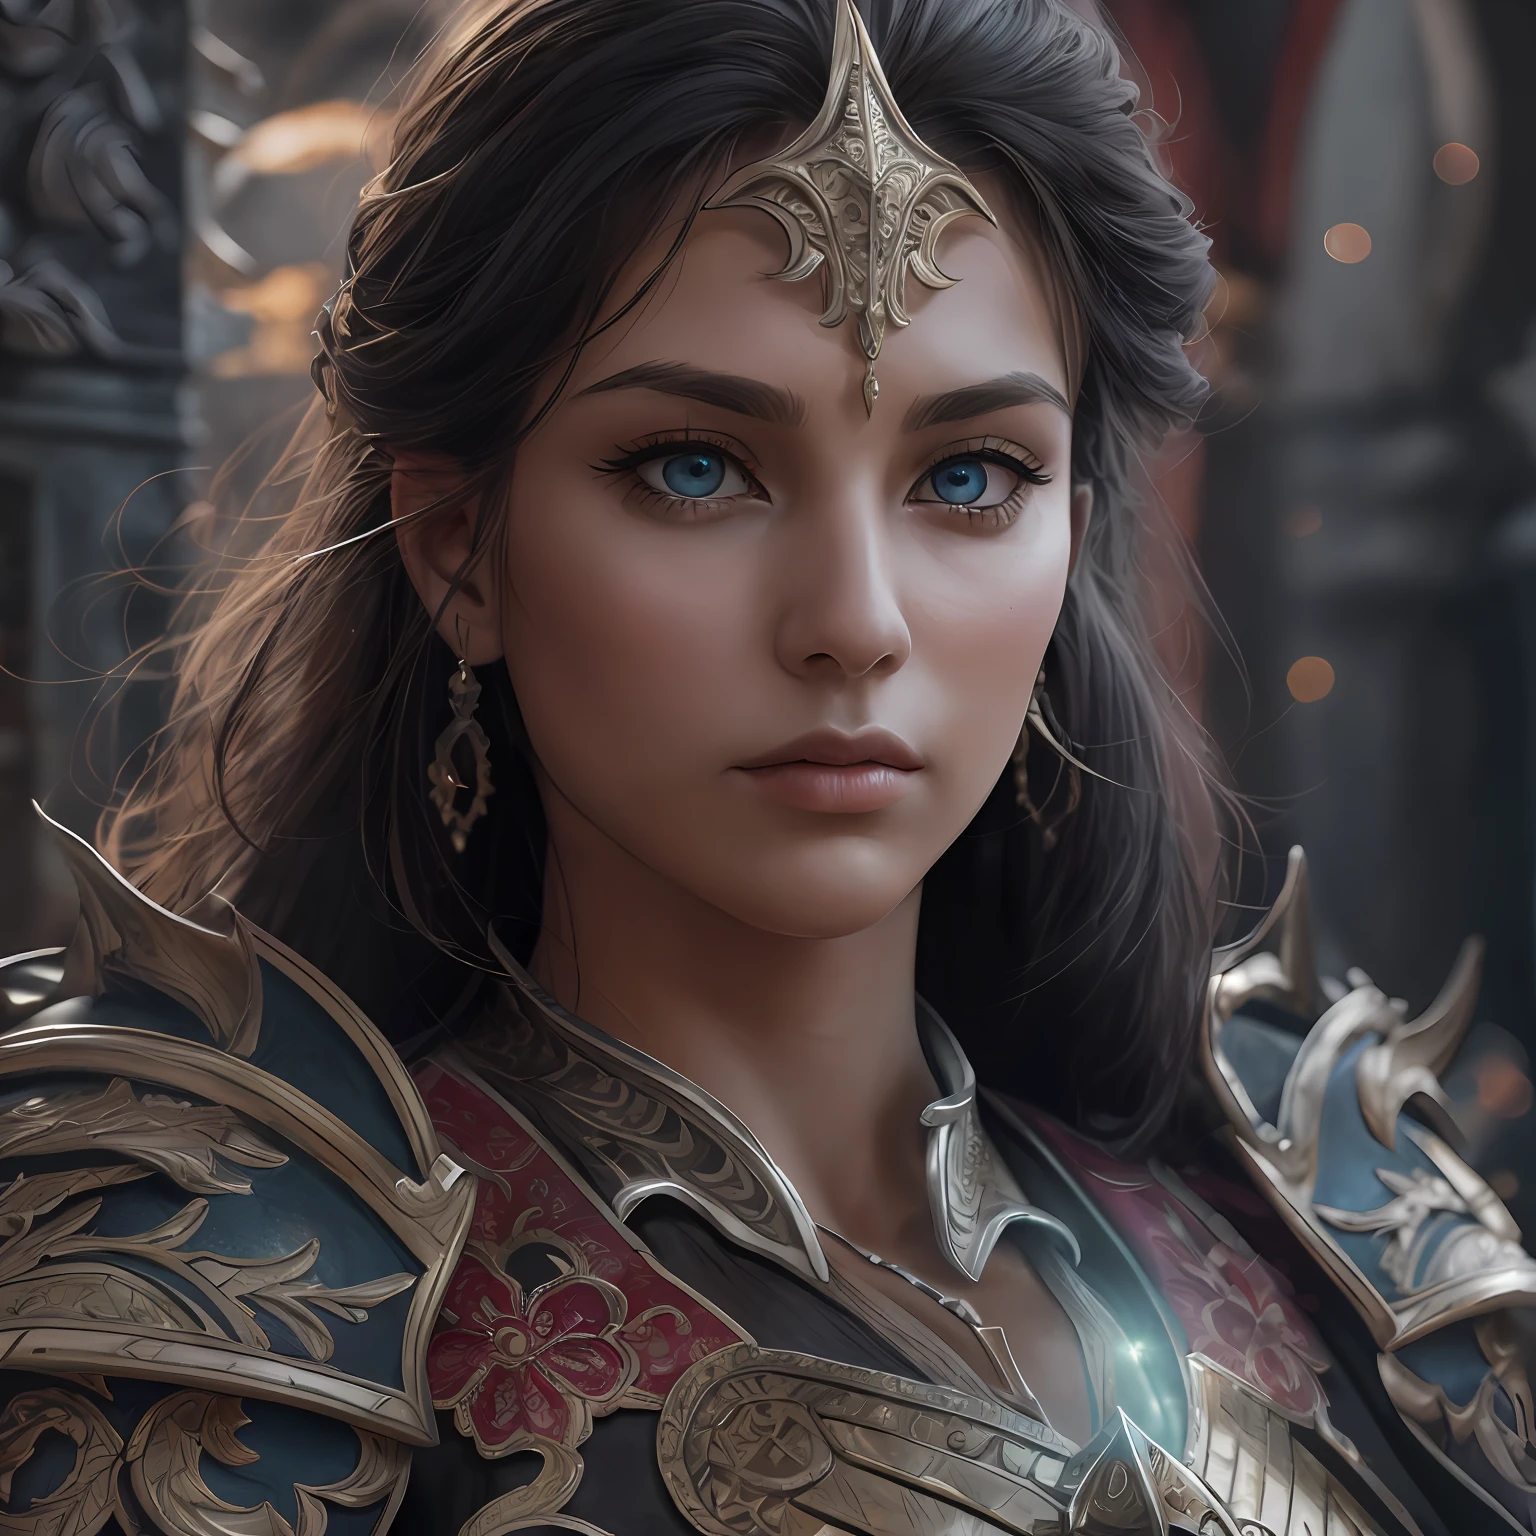 arafed, high details, best quality, 8k, [ultra detailed], masterpiece, best quality, (extremely detailed), dynamic angle, ultra wide shot, RAW, photorealistic, fantasy art, dnd art, rpg art, realistic art, a picture of female human, epic fanatsy paladin, divine warrior, full body, ultra detailed face (1.5) [[anatomically correct]] dynamic position (1.5 intricate details, Masterpiece, best quality) in front of fantasy temple (1.5 intricate details, Masterpiece, best quality), woman wearing bright armor, heavy armor (1.4 intricate details, Masterpiece, best quality), armed with epic sword, epic holy sword, radiant sword, sword sheds bright ligh(1.6, masterpiece), purple cloak (1.3, masterpiece) holy symbol with [bright aura] (1.4 intricate details, Masterpiece, best quality), long hair, dark hair, green eyes intense eyes, fantasy temple background (1.5 intricate details, Masterpiece, best quality) god rays, divine rays ,(1.4 intricate details, Masterpiece, best quality), holy atmosphere, dynamic angle, (1.4 intricate details, Masterpiece, best quality), 3D rendering, high details, best quality, highres, ultra wide angle@EG1